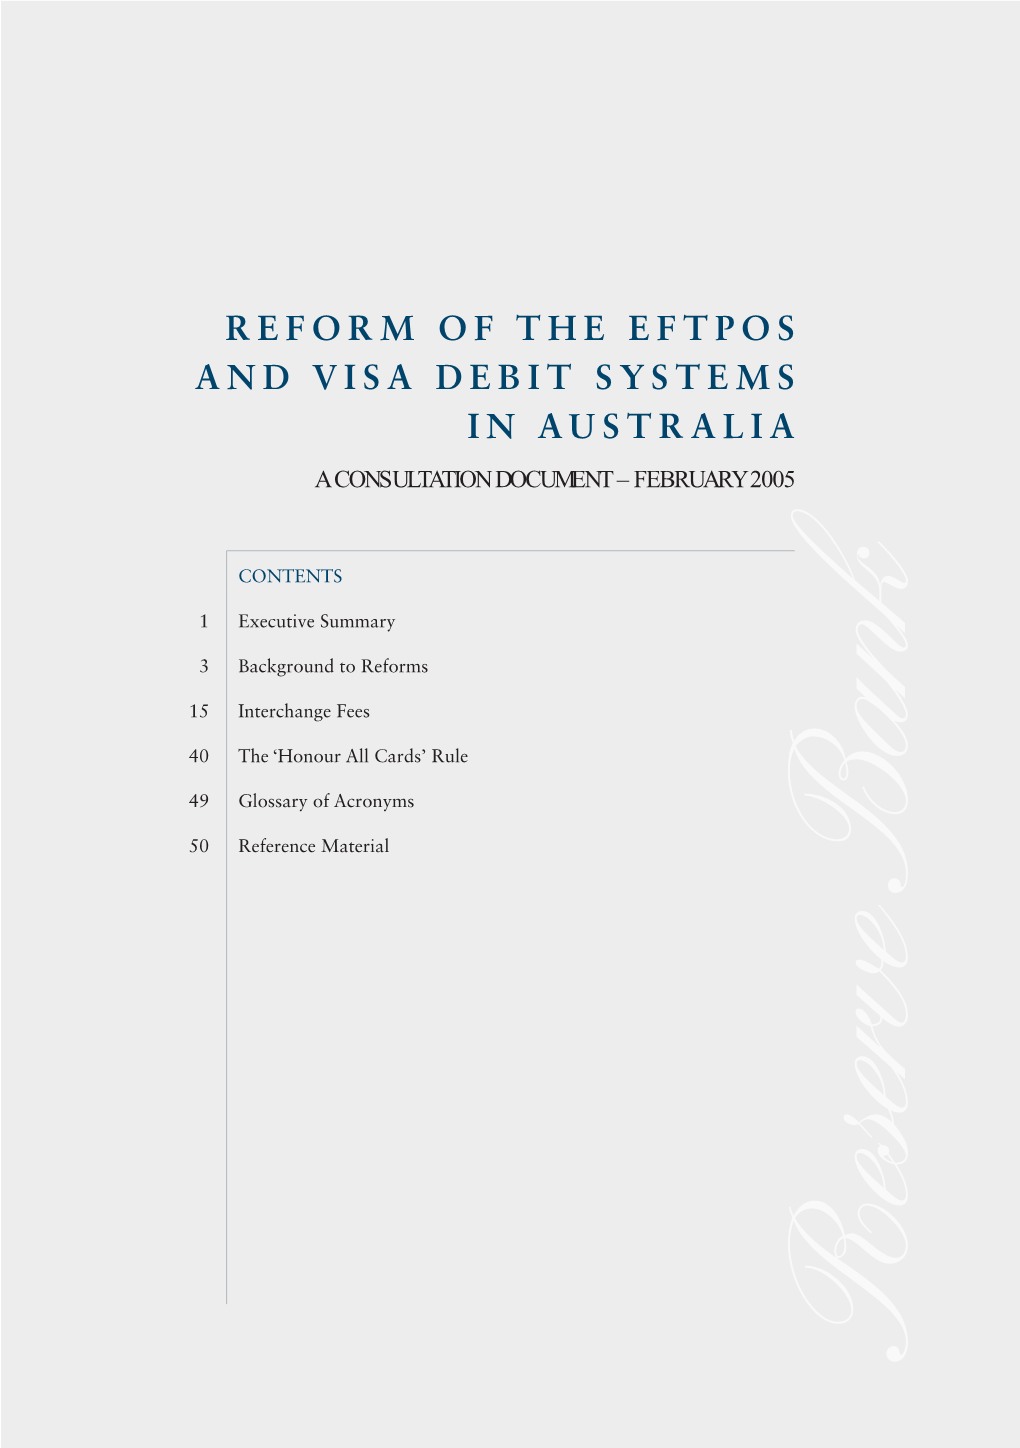 Reform of the Eftpos and Visa Debit Systems in Australia a Consultation Document – February 2005